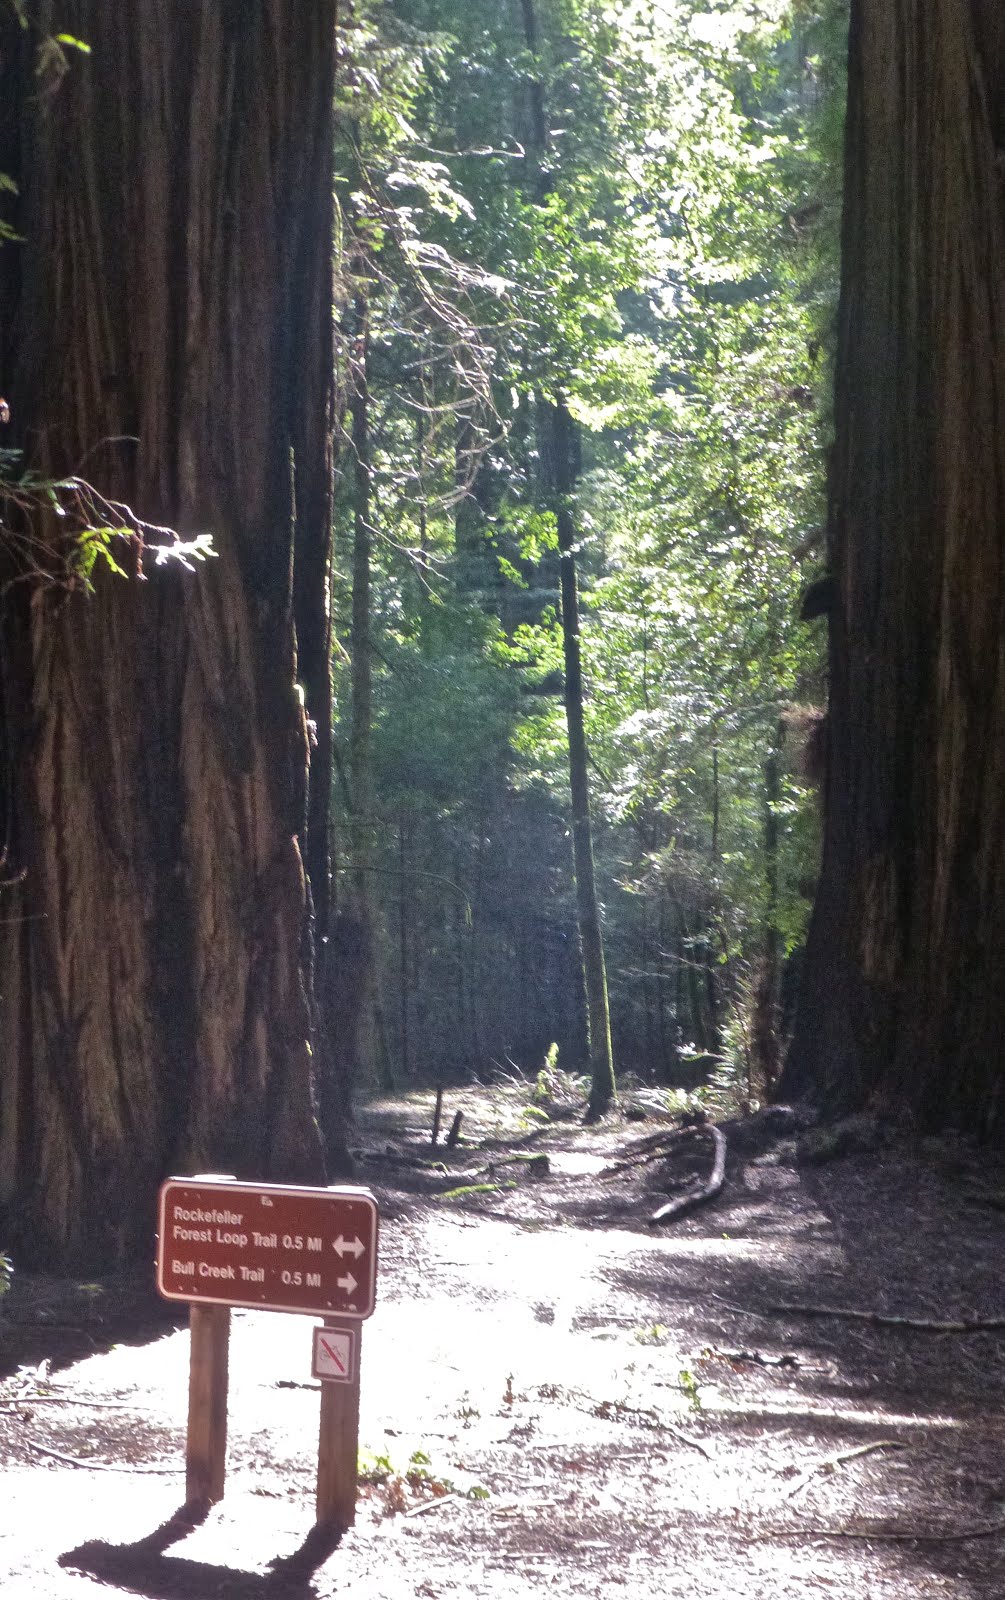 The Avenue of the Giants